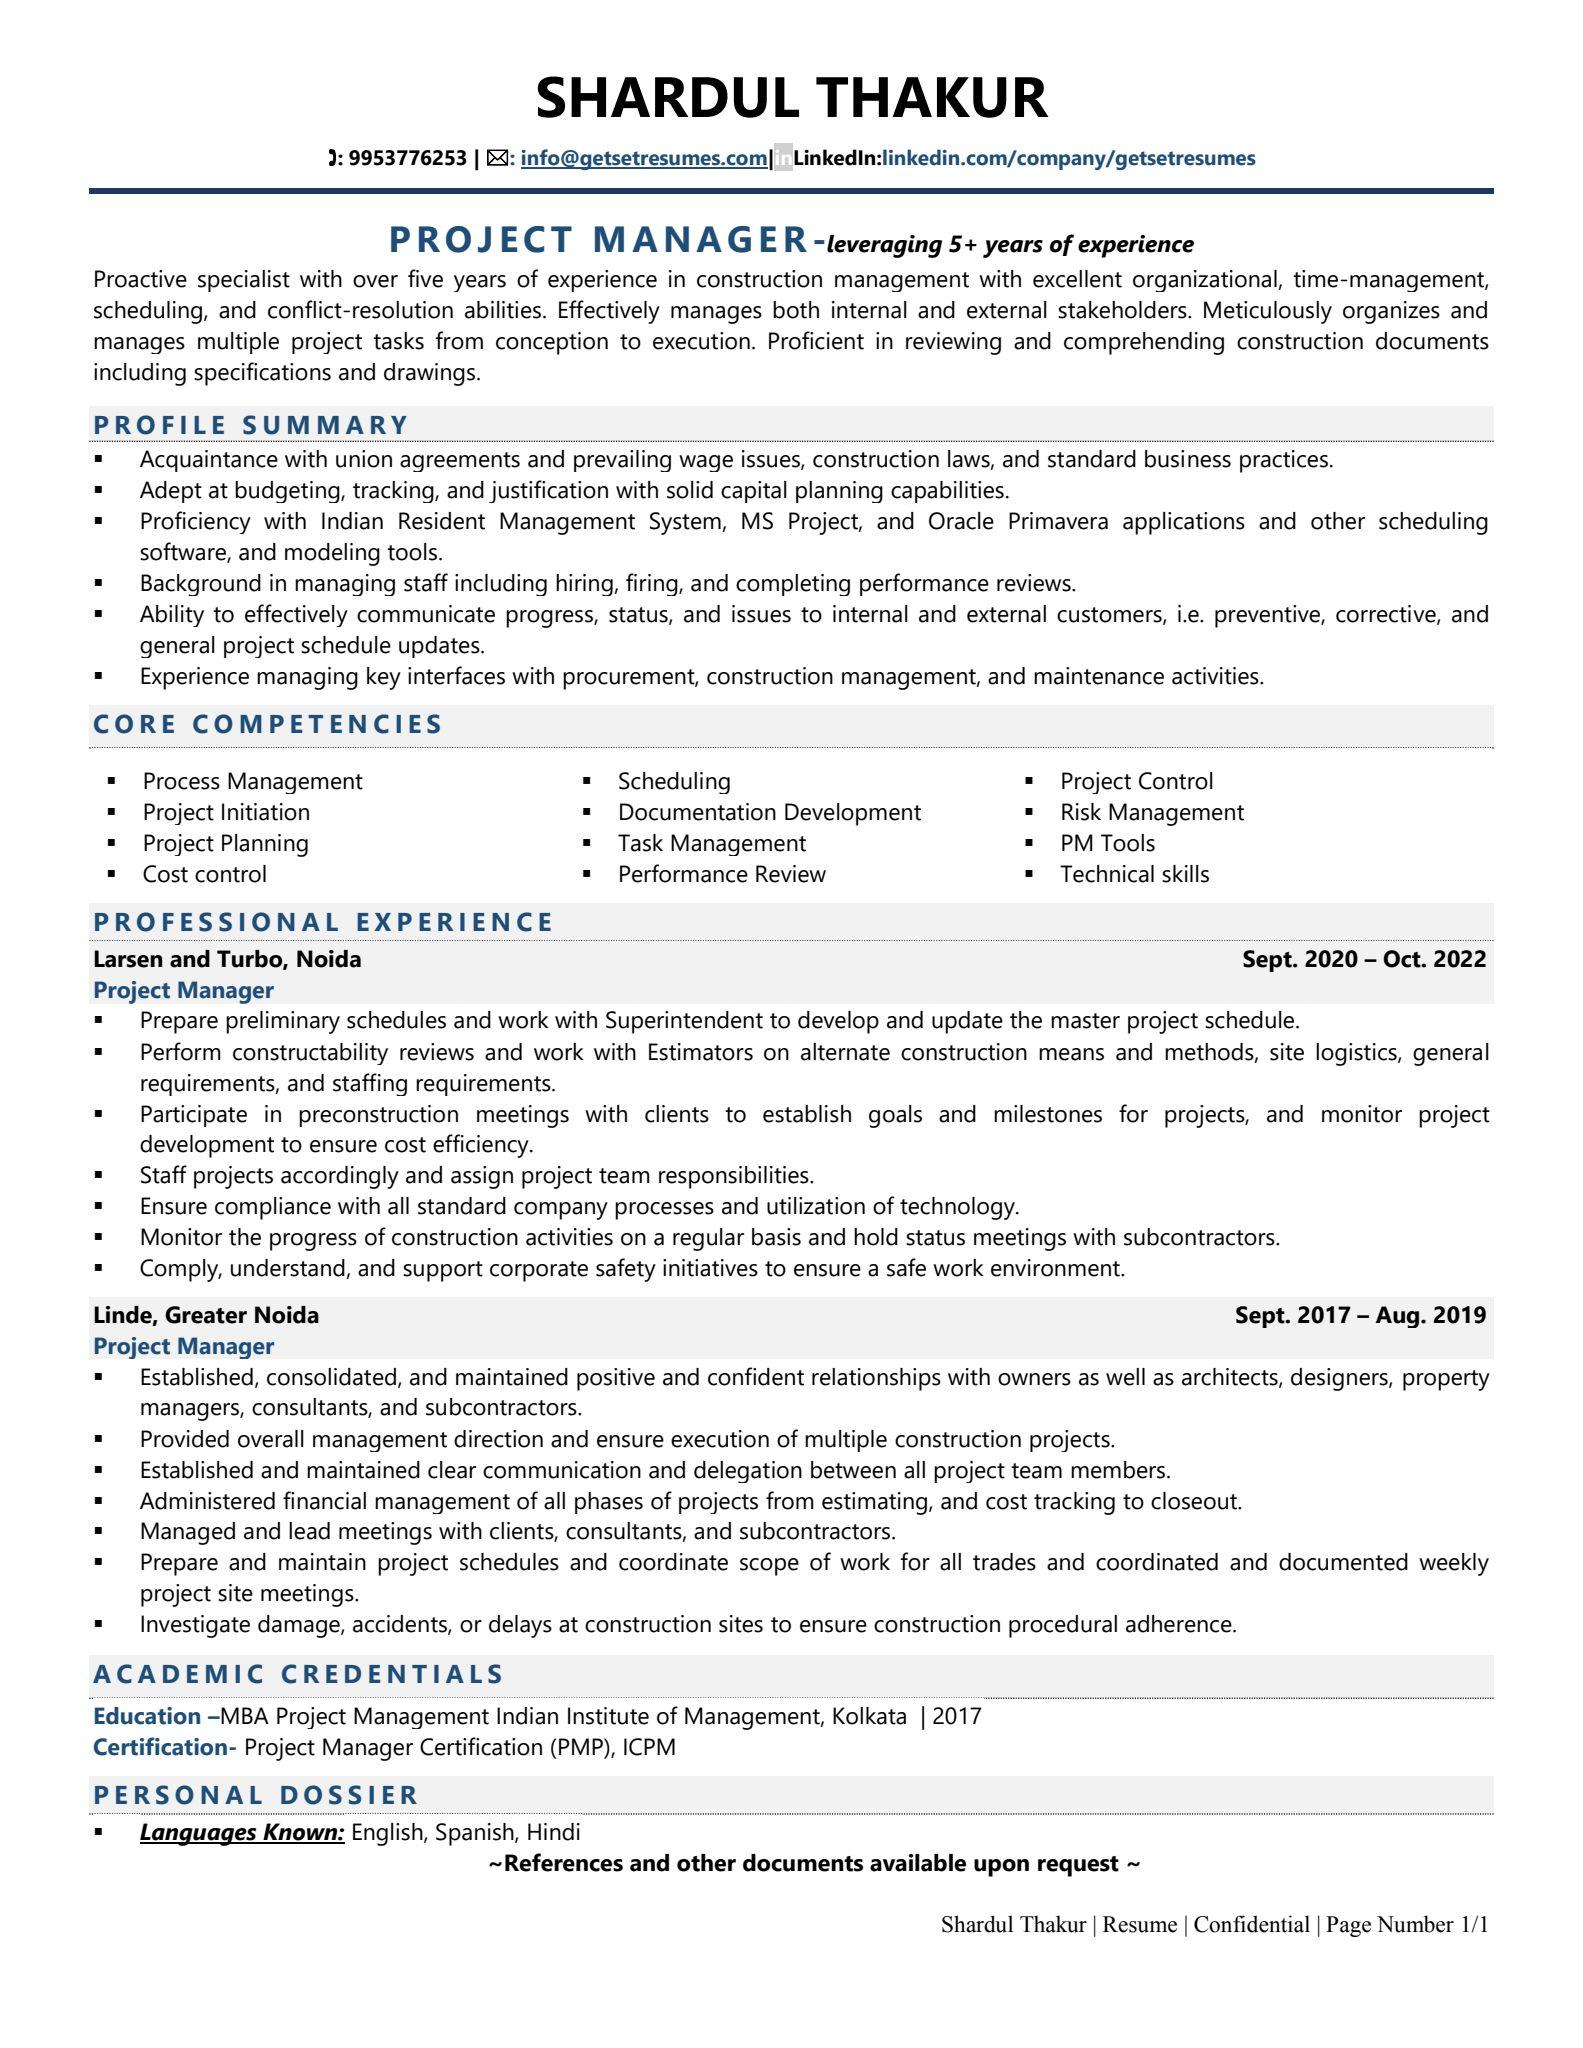 resume for project manager